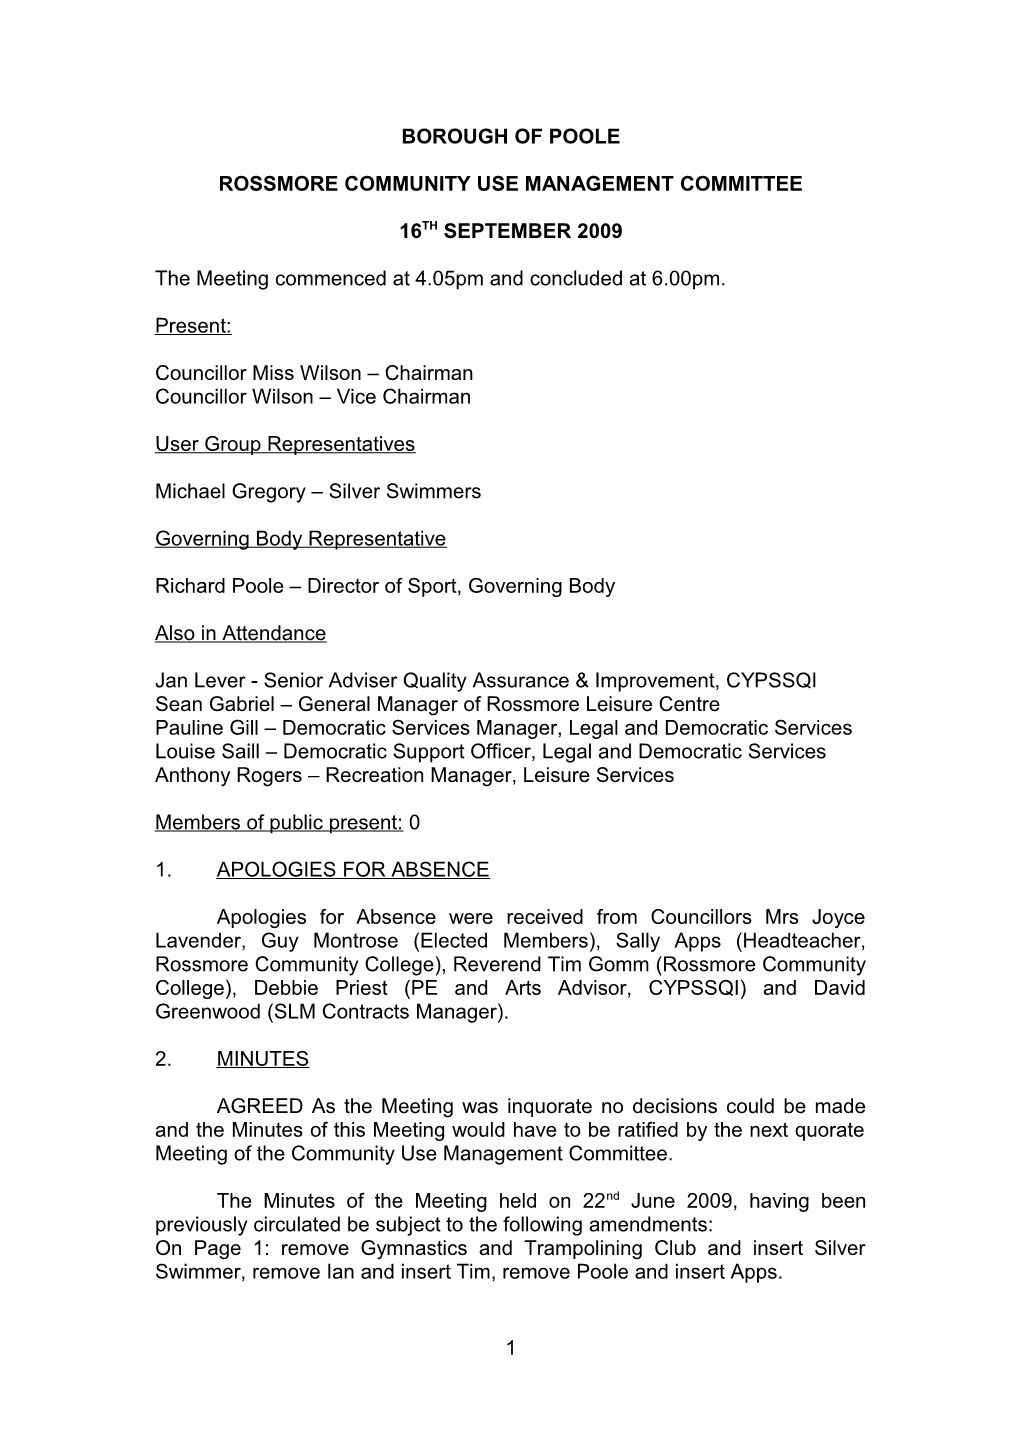 Minutes - Rossmore Community Use Management Committee - 16 September 2009